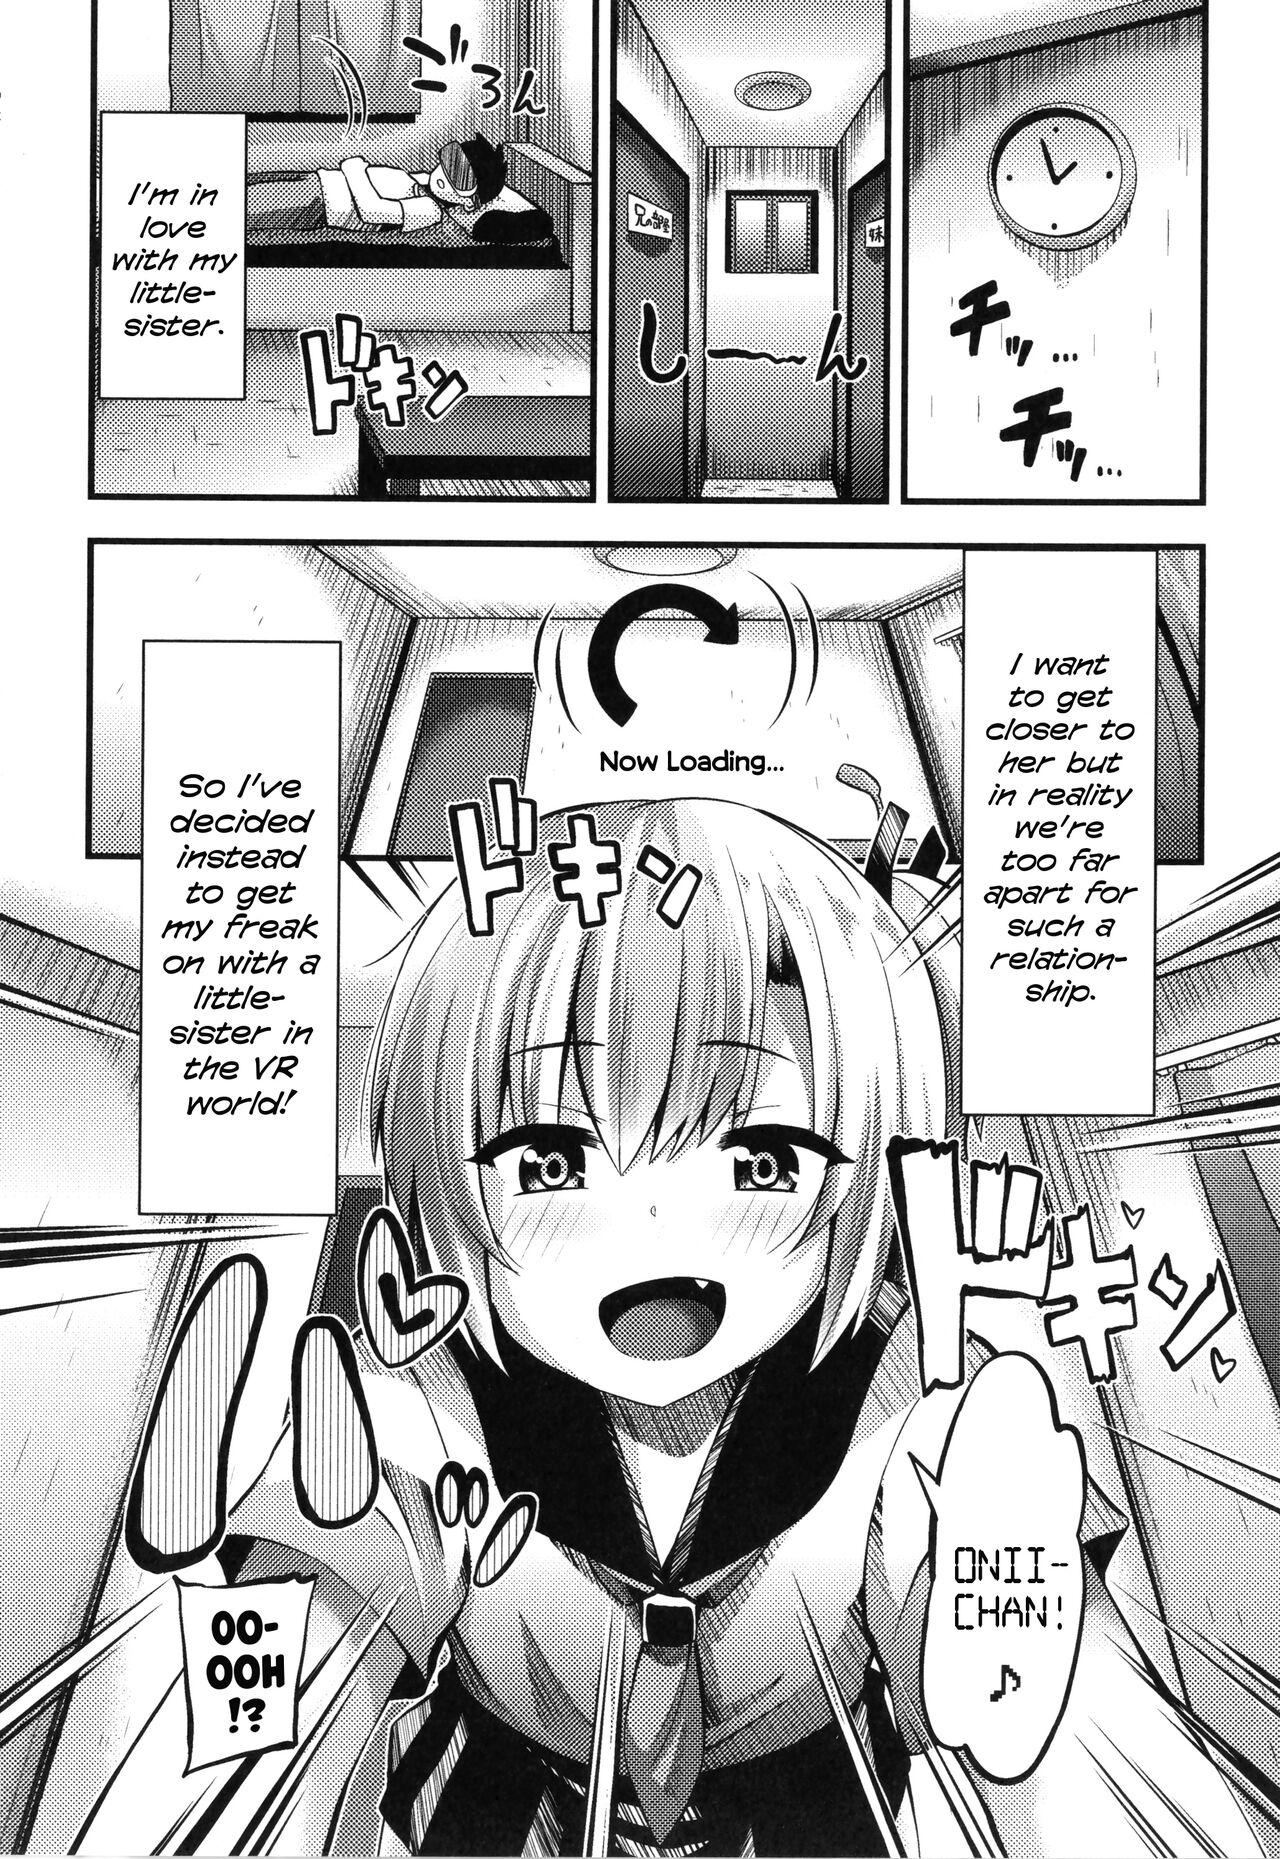 Cbt VR Imouto wa Sugu Soko ni | My VR Little-Sister is Just Around the Corner Teasing - Page 4